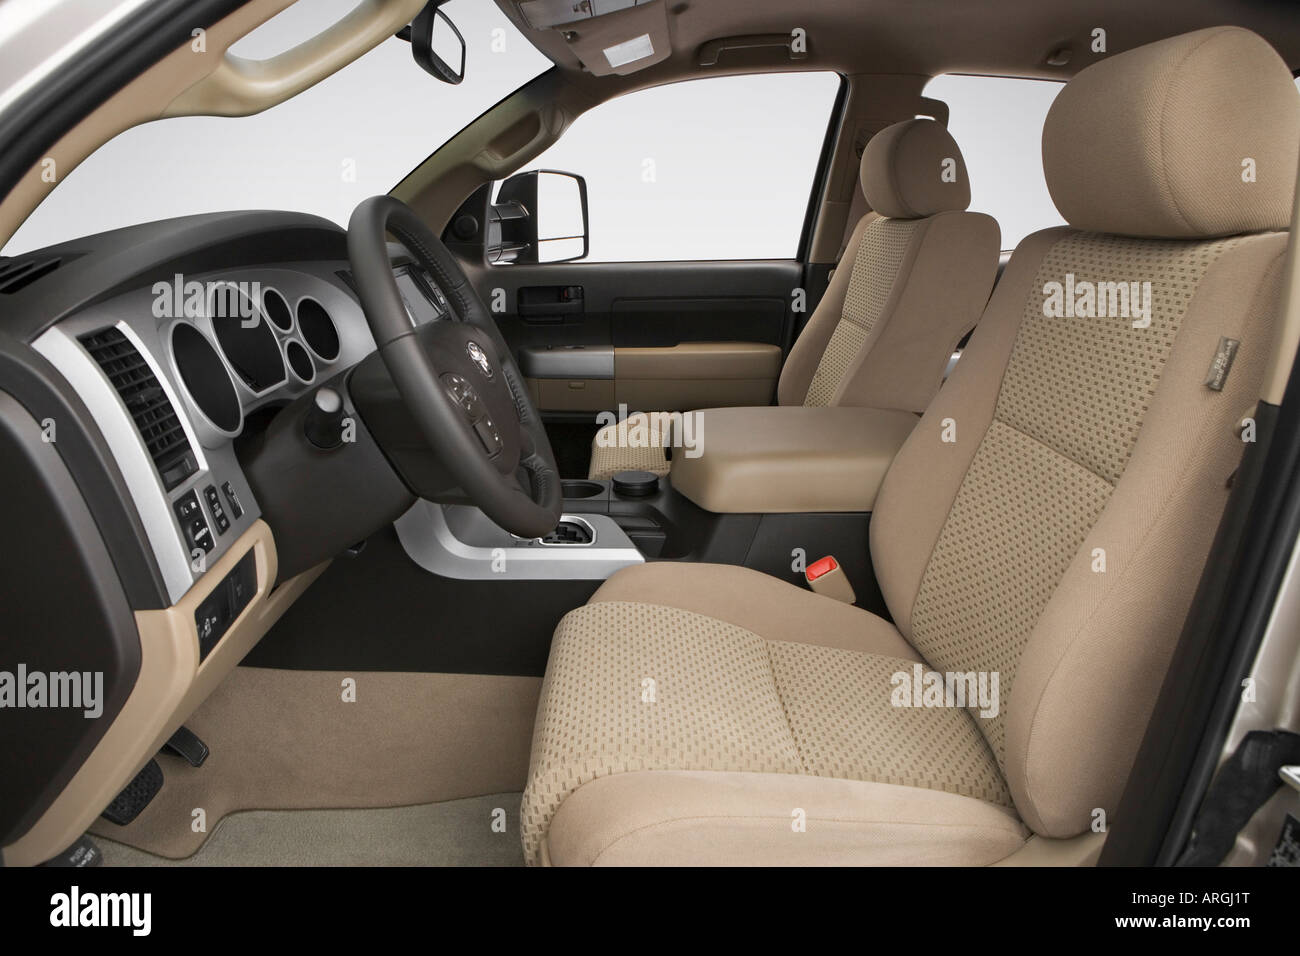 2007 Toyota Tundra Sr5 V8 In Beige Front Seats Stock Photo